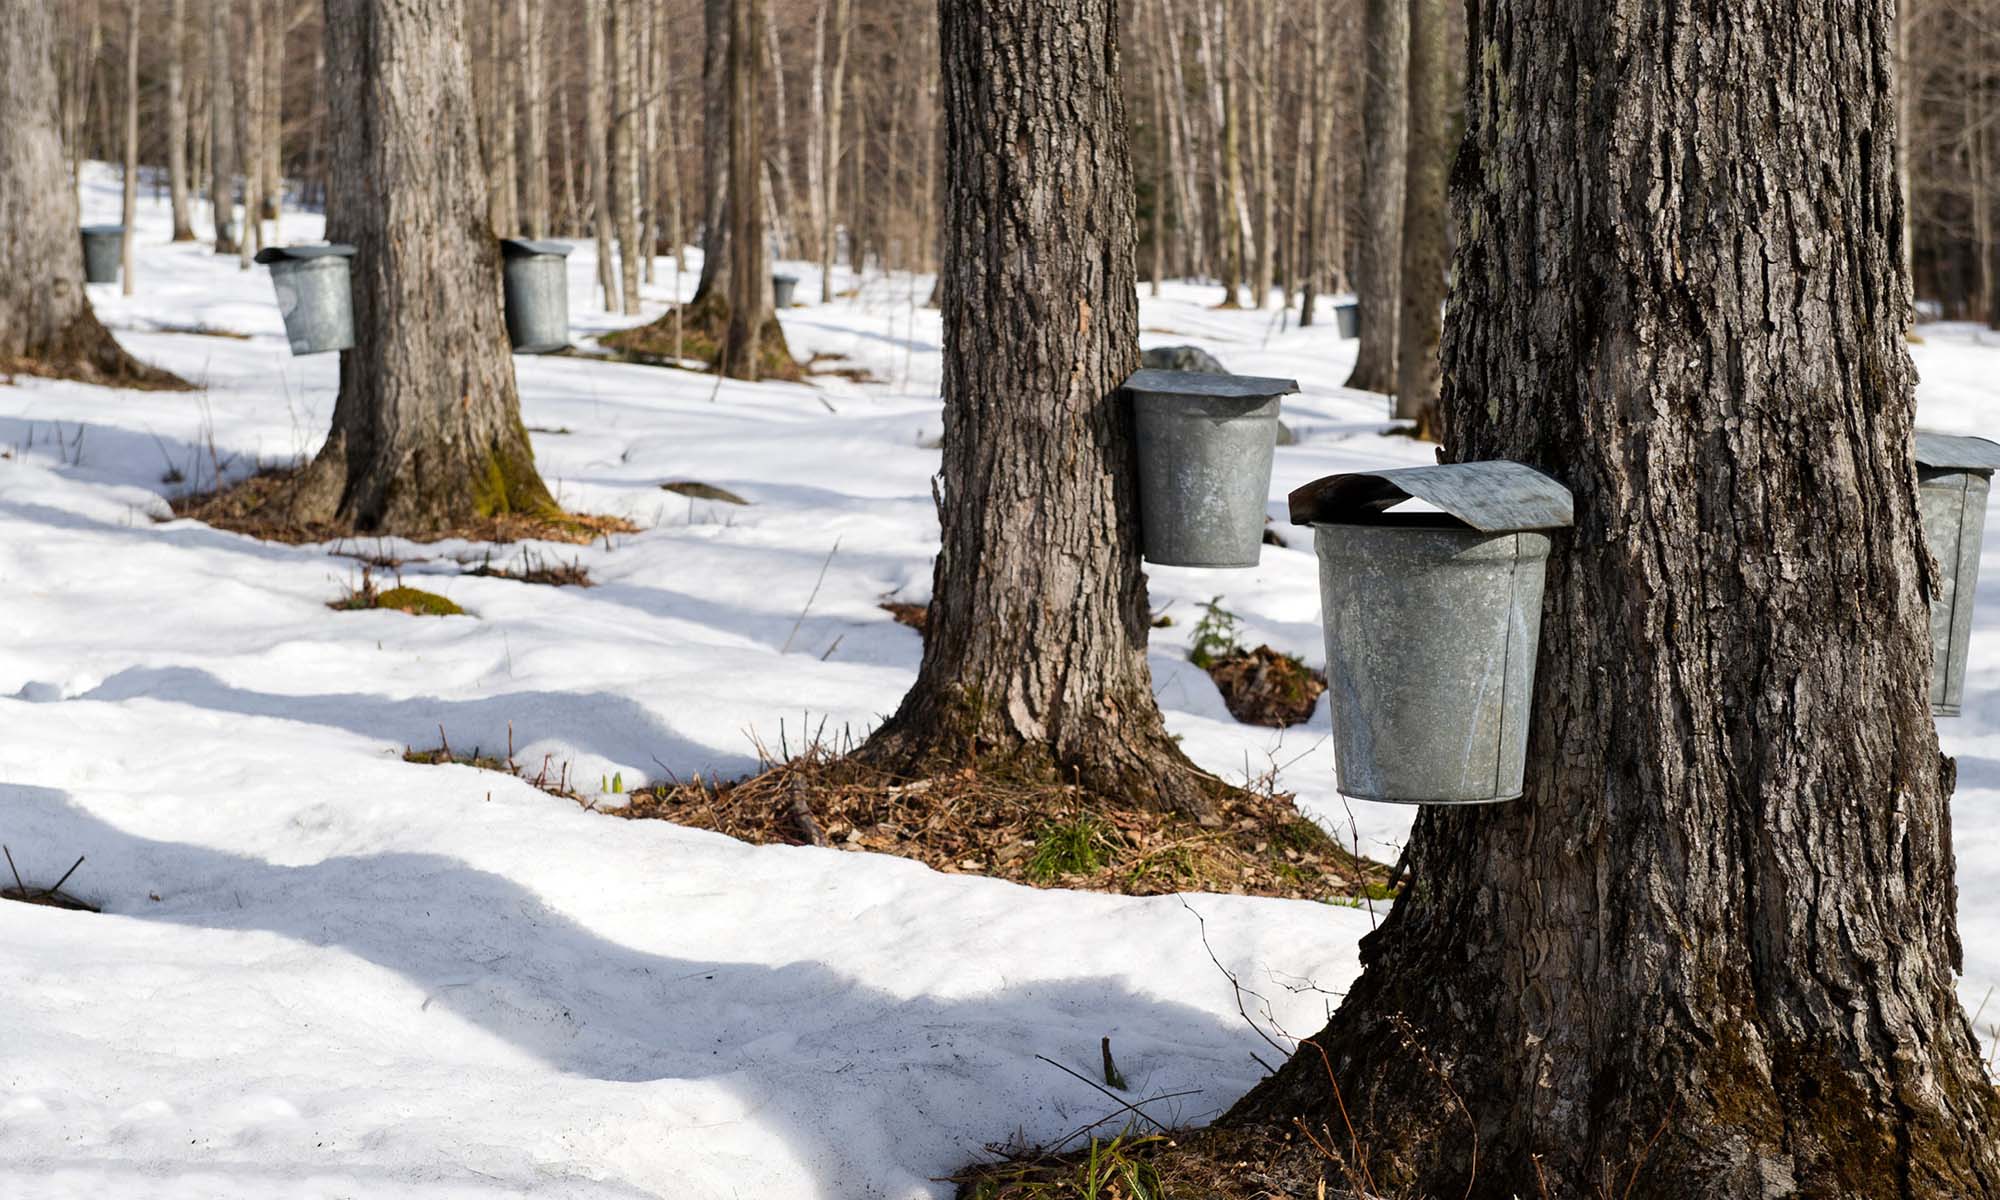 A stand of maple trees in late winter with sap buckets attached to the trunks.